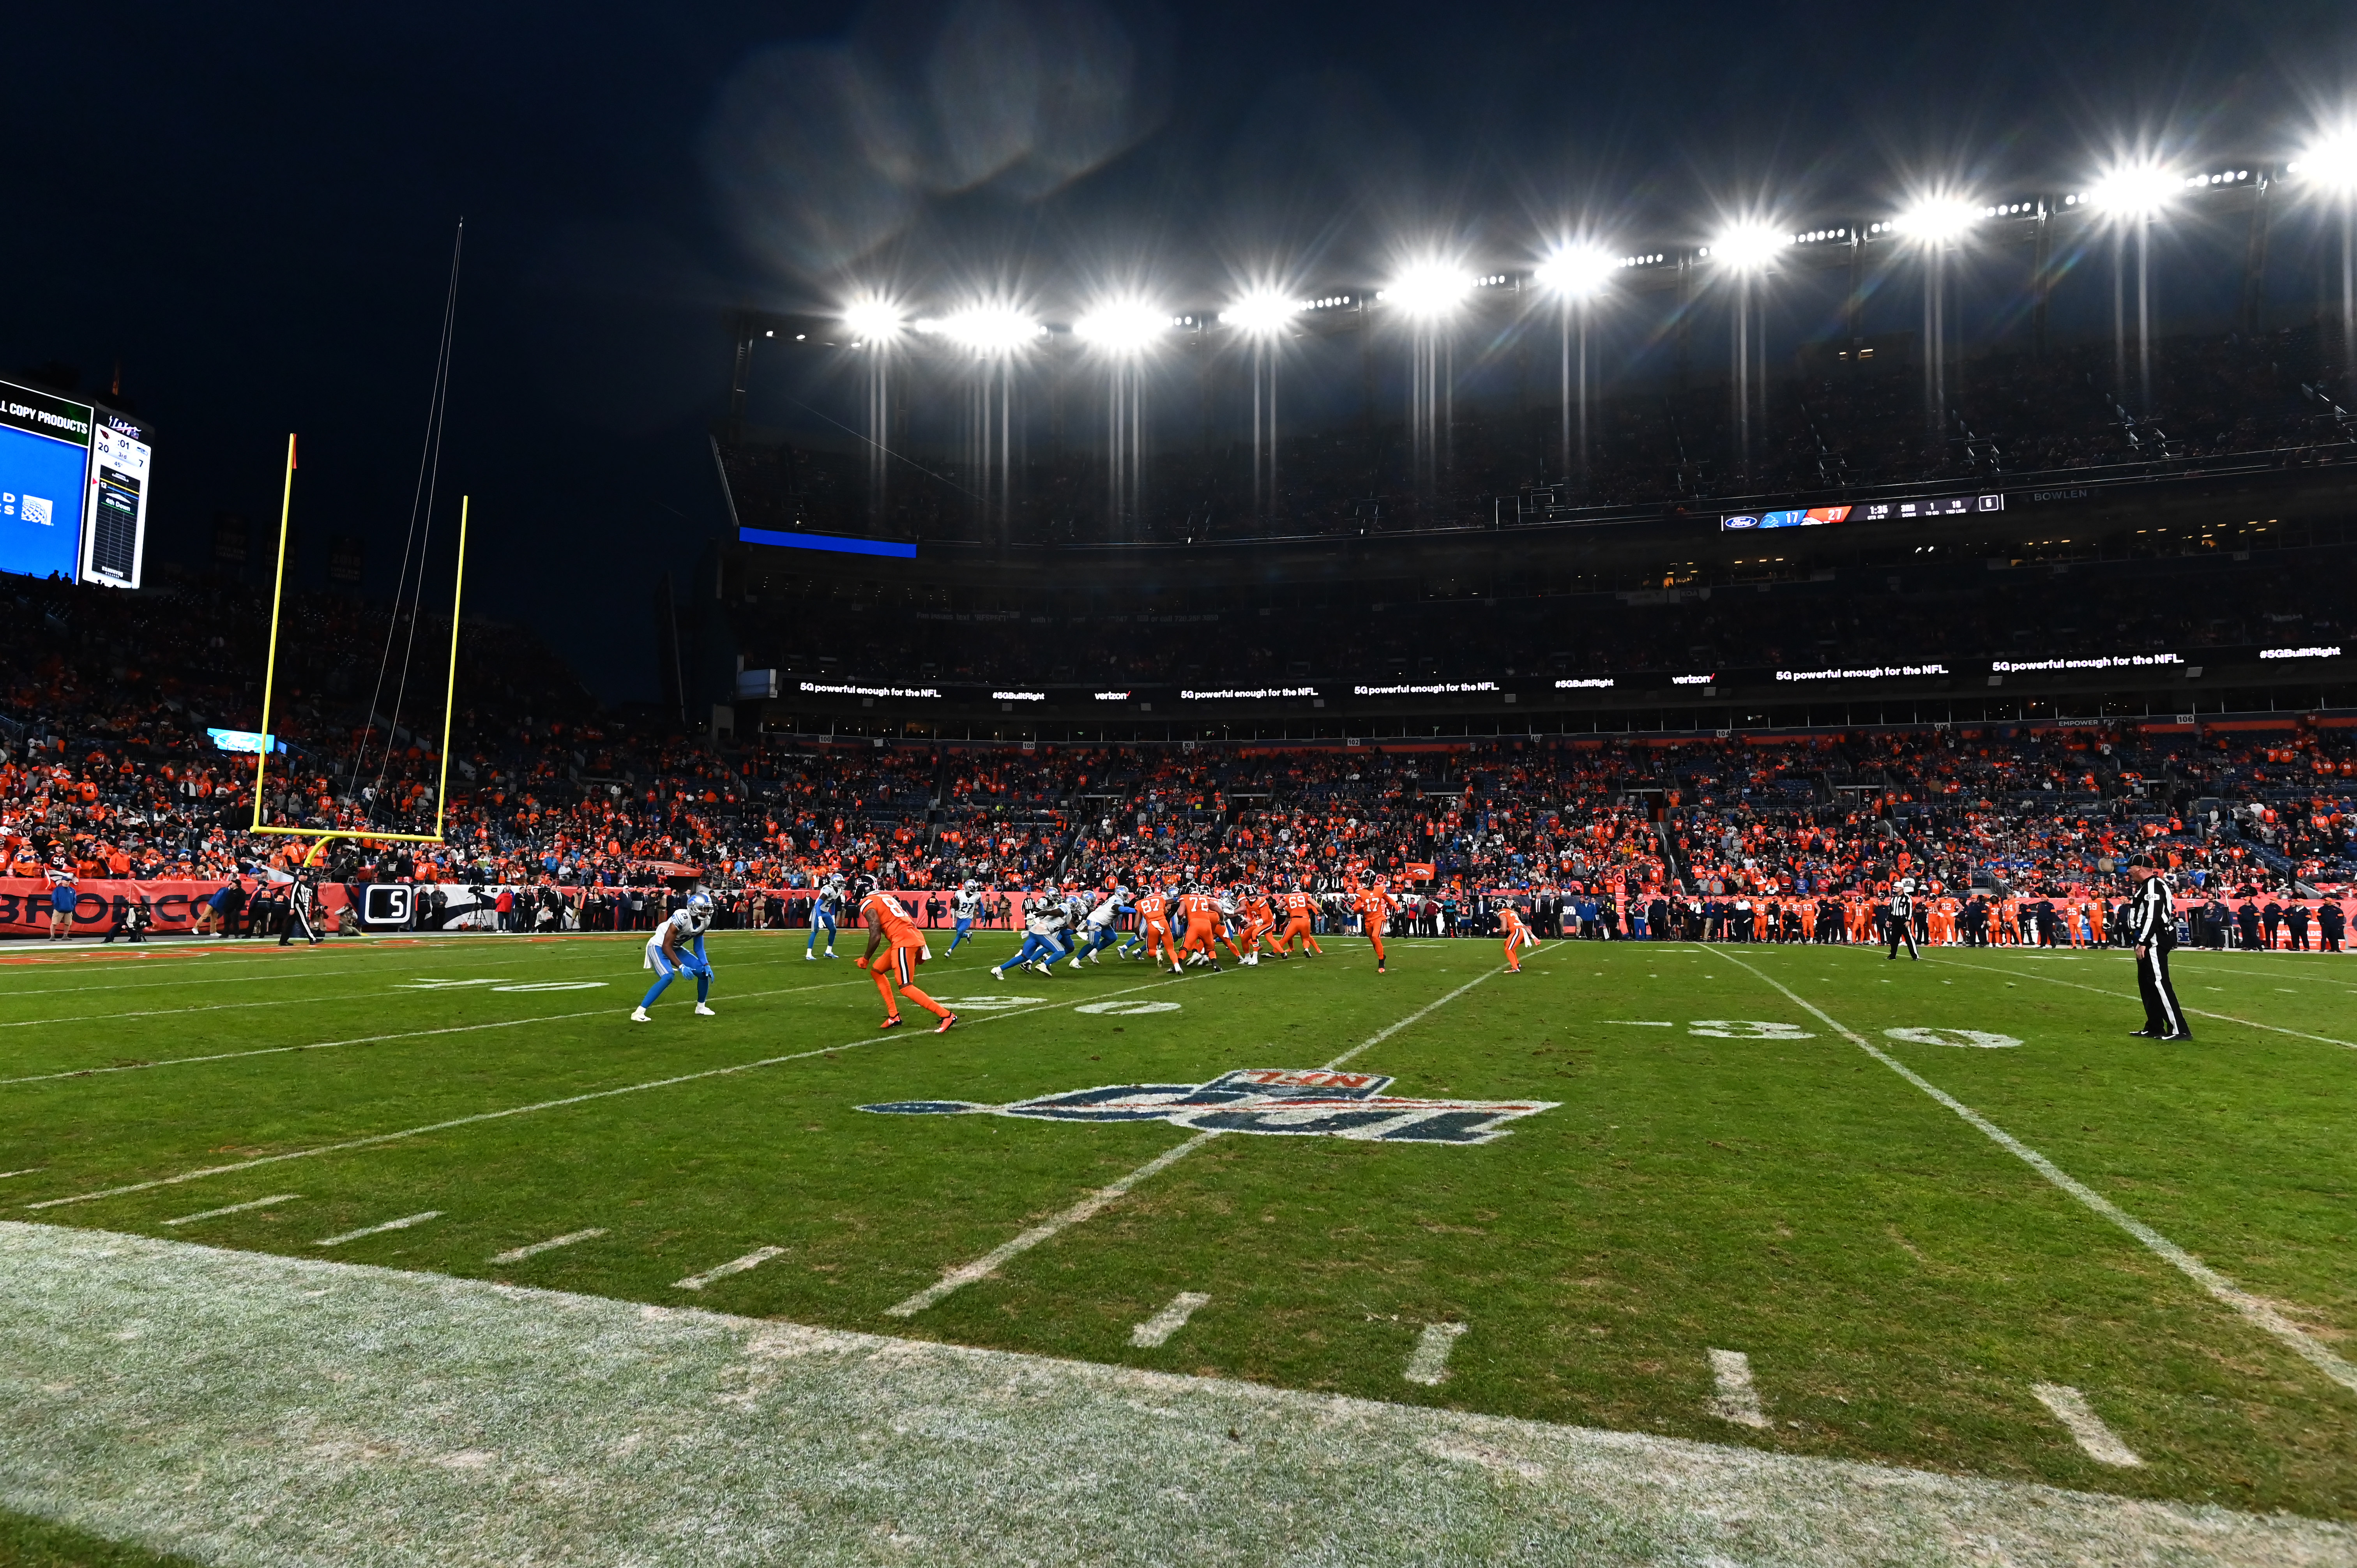 General wide view of Empower Field at Mile High during a game between the Detroit Lions against the Denver Broncos.